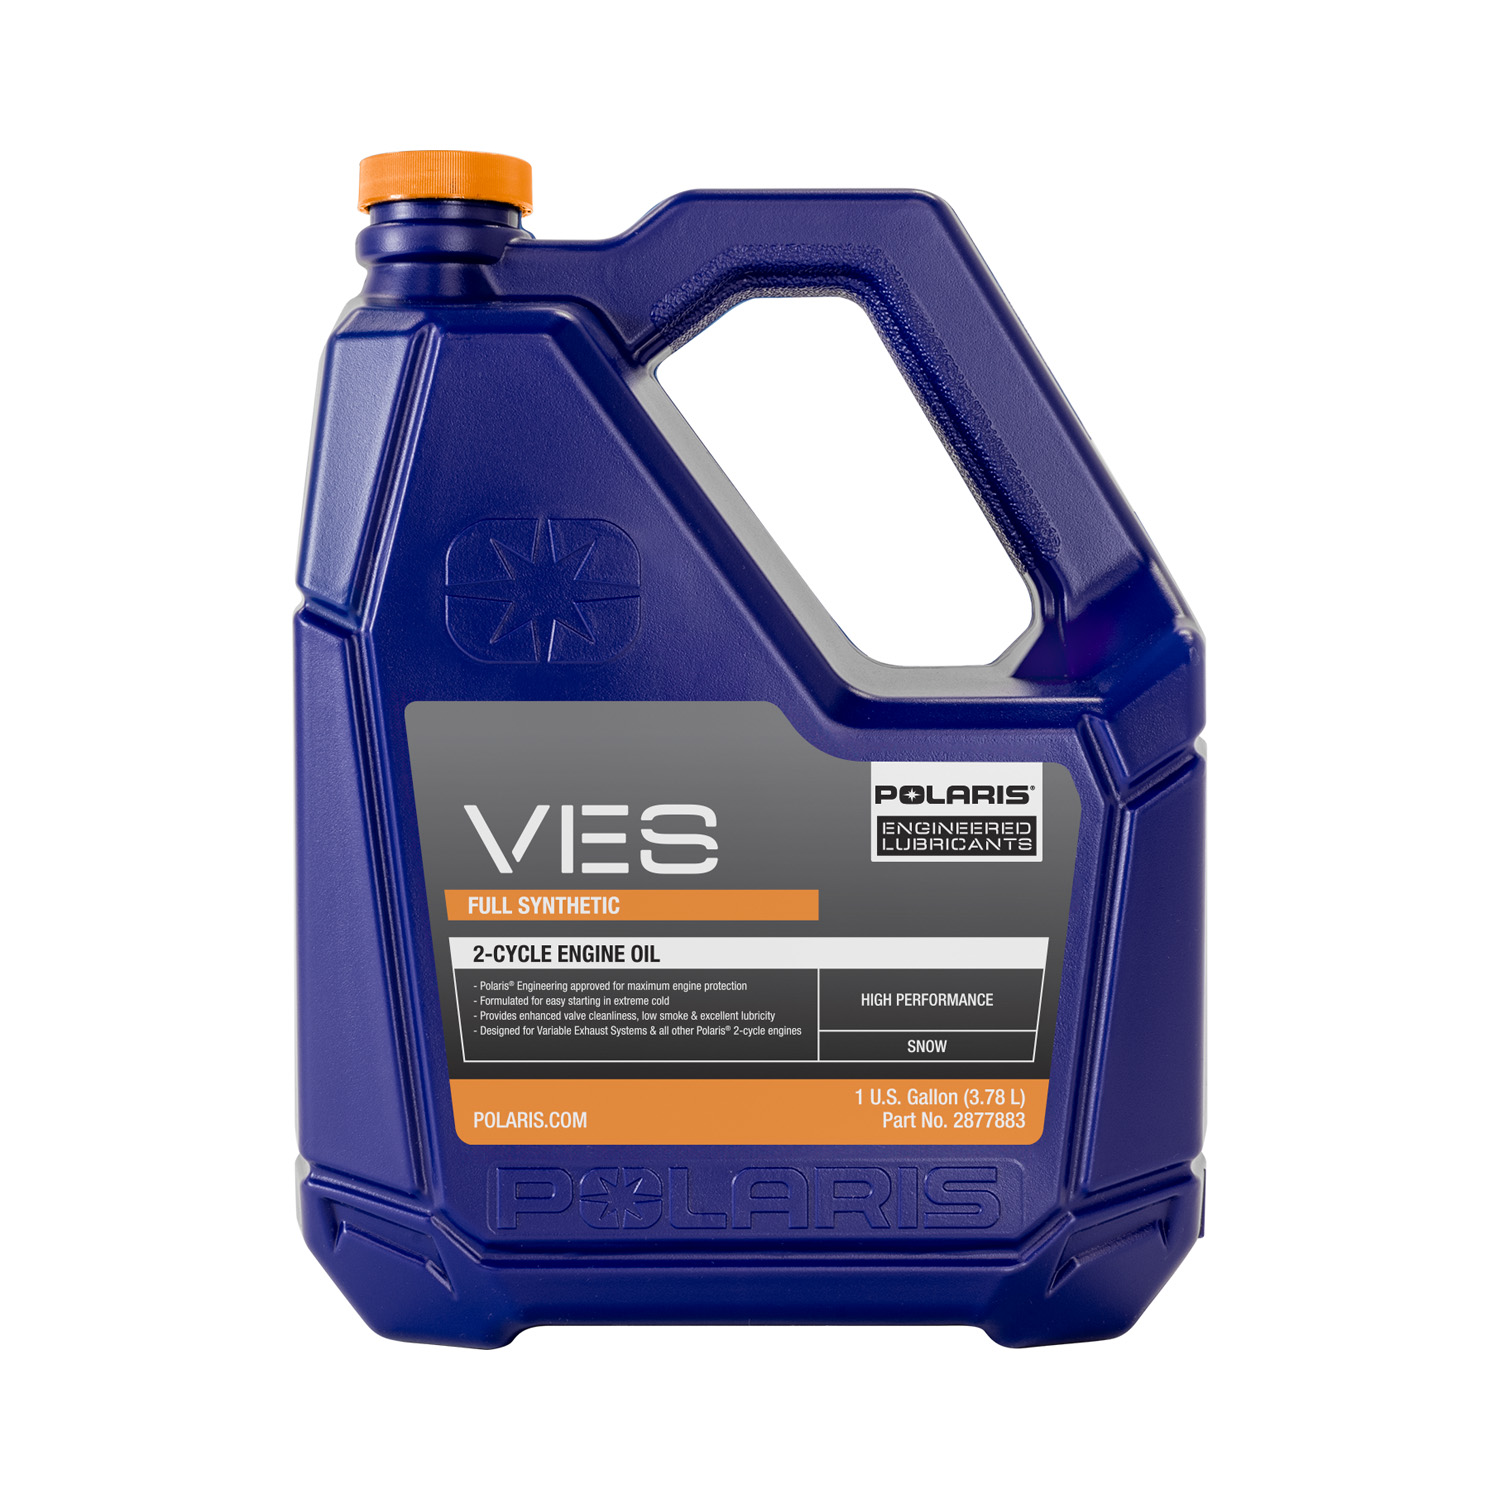 VES Full Synthetic 2-Cycle Oil, For 2-Stroke Snowmobiles | Polaris